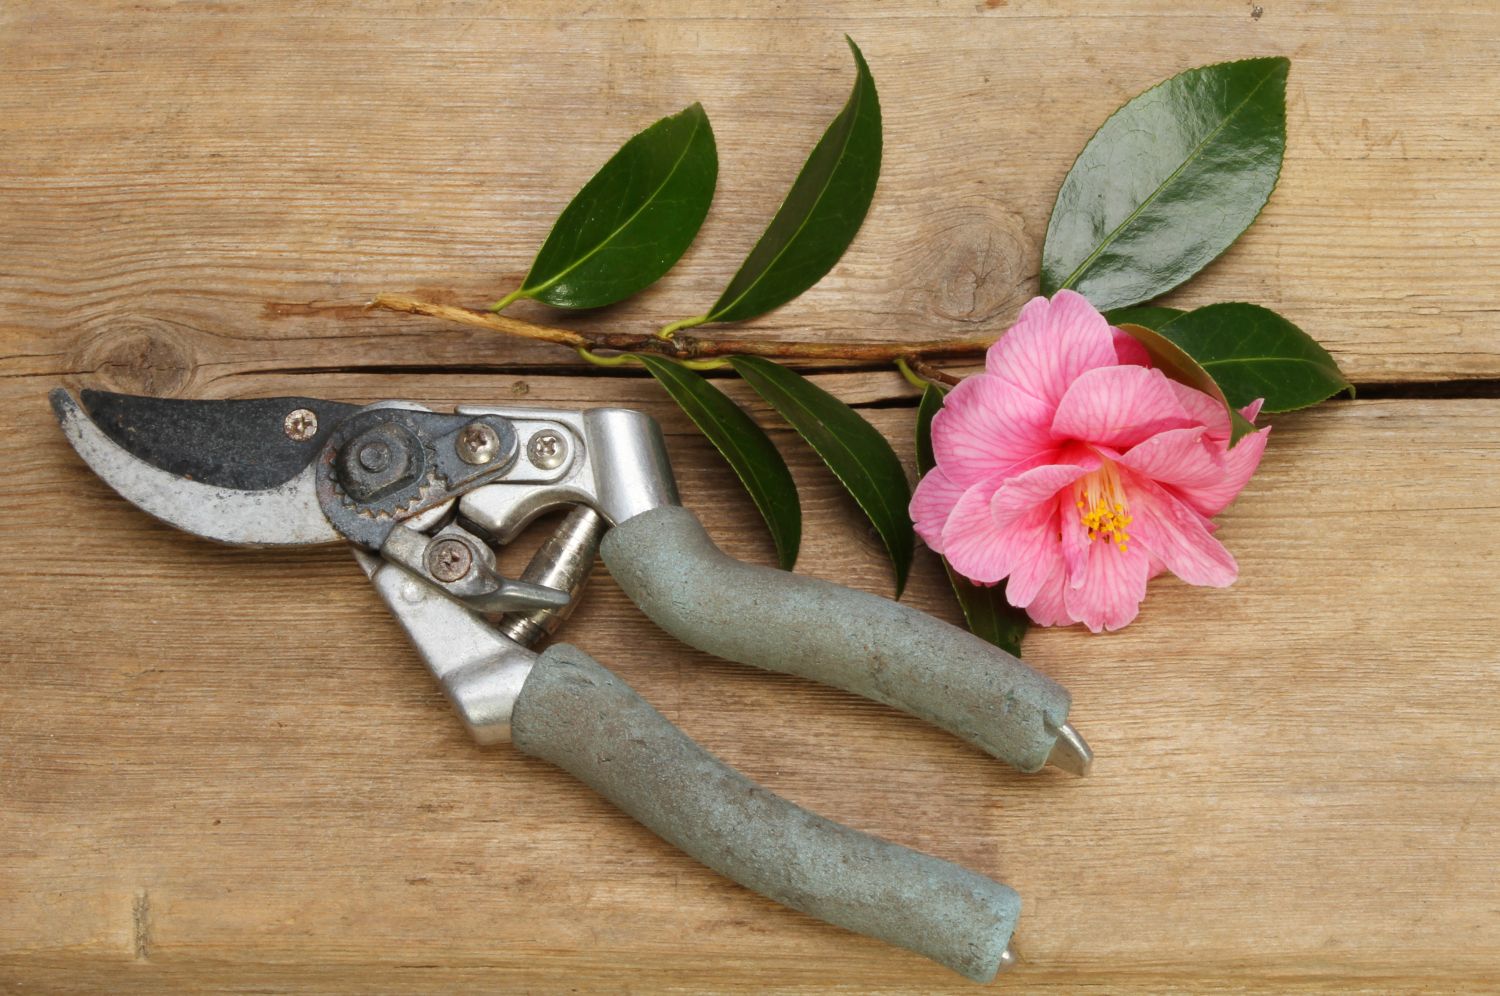 Shears and a camellia flower